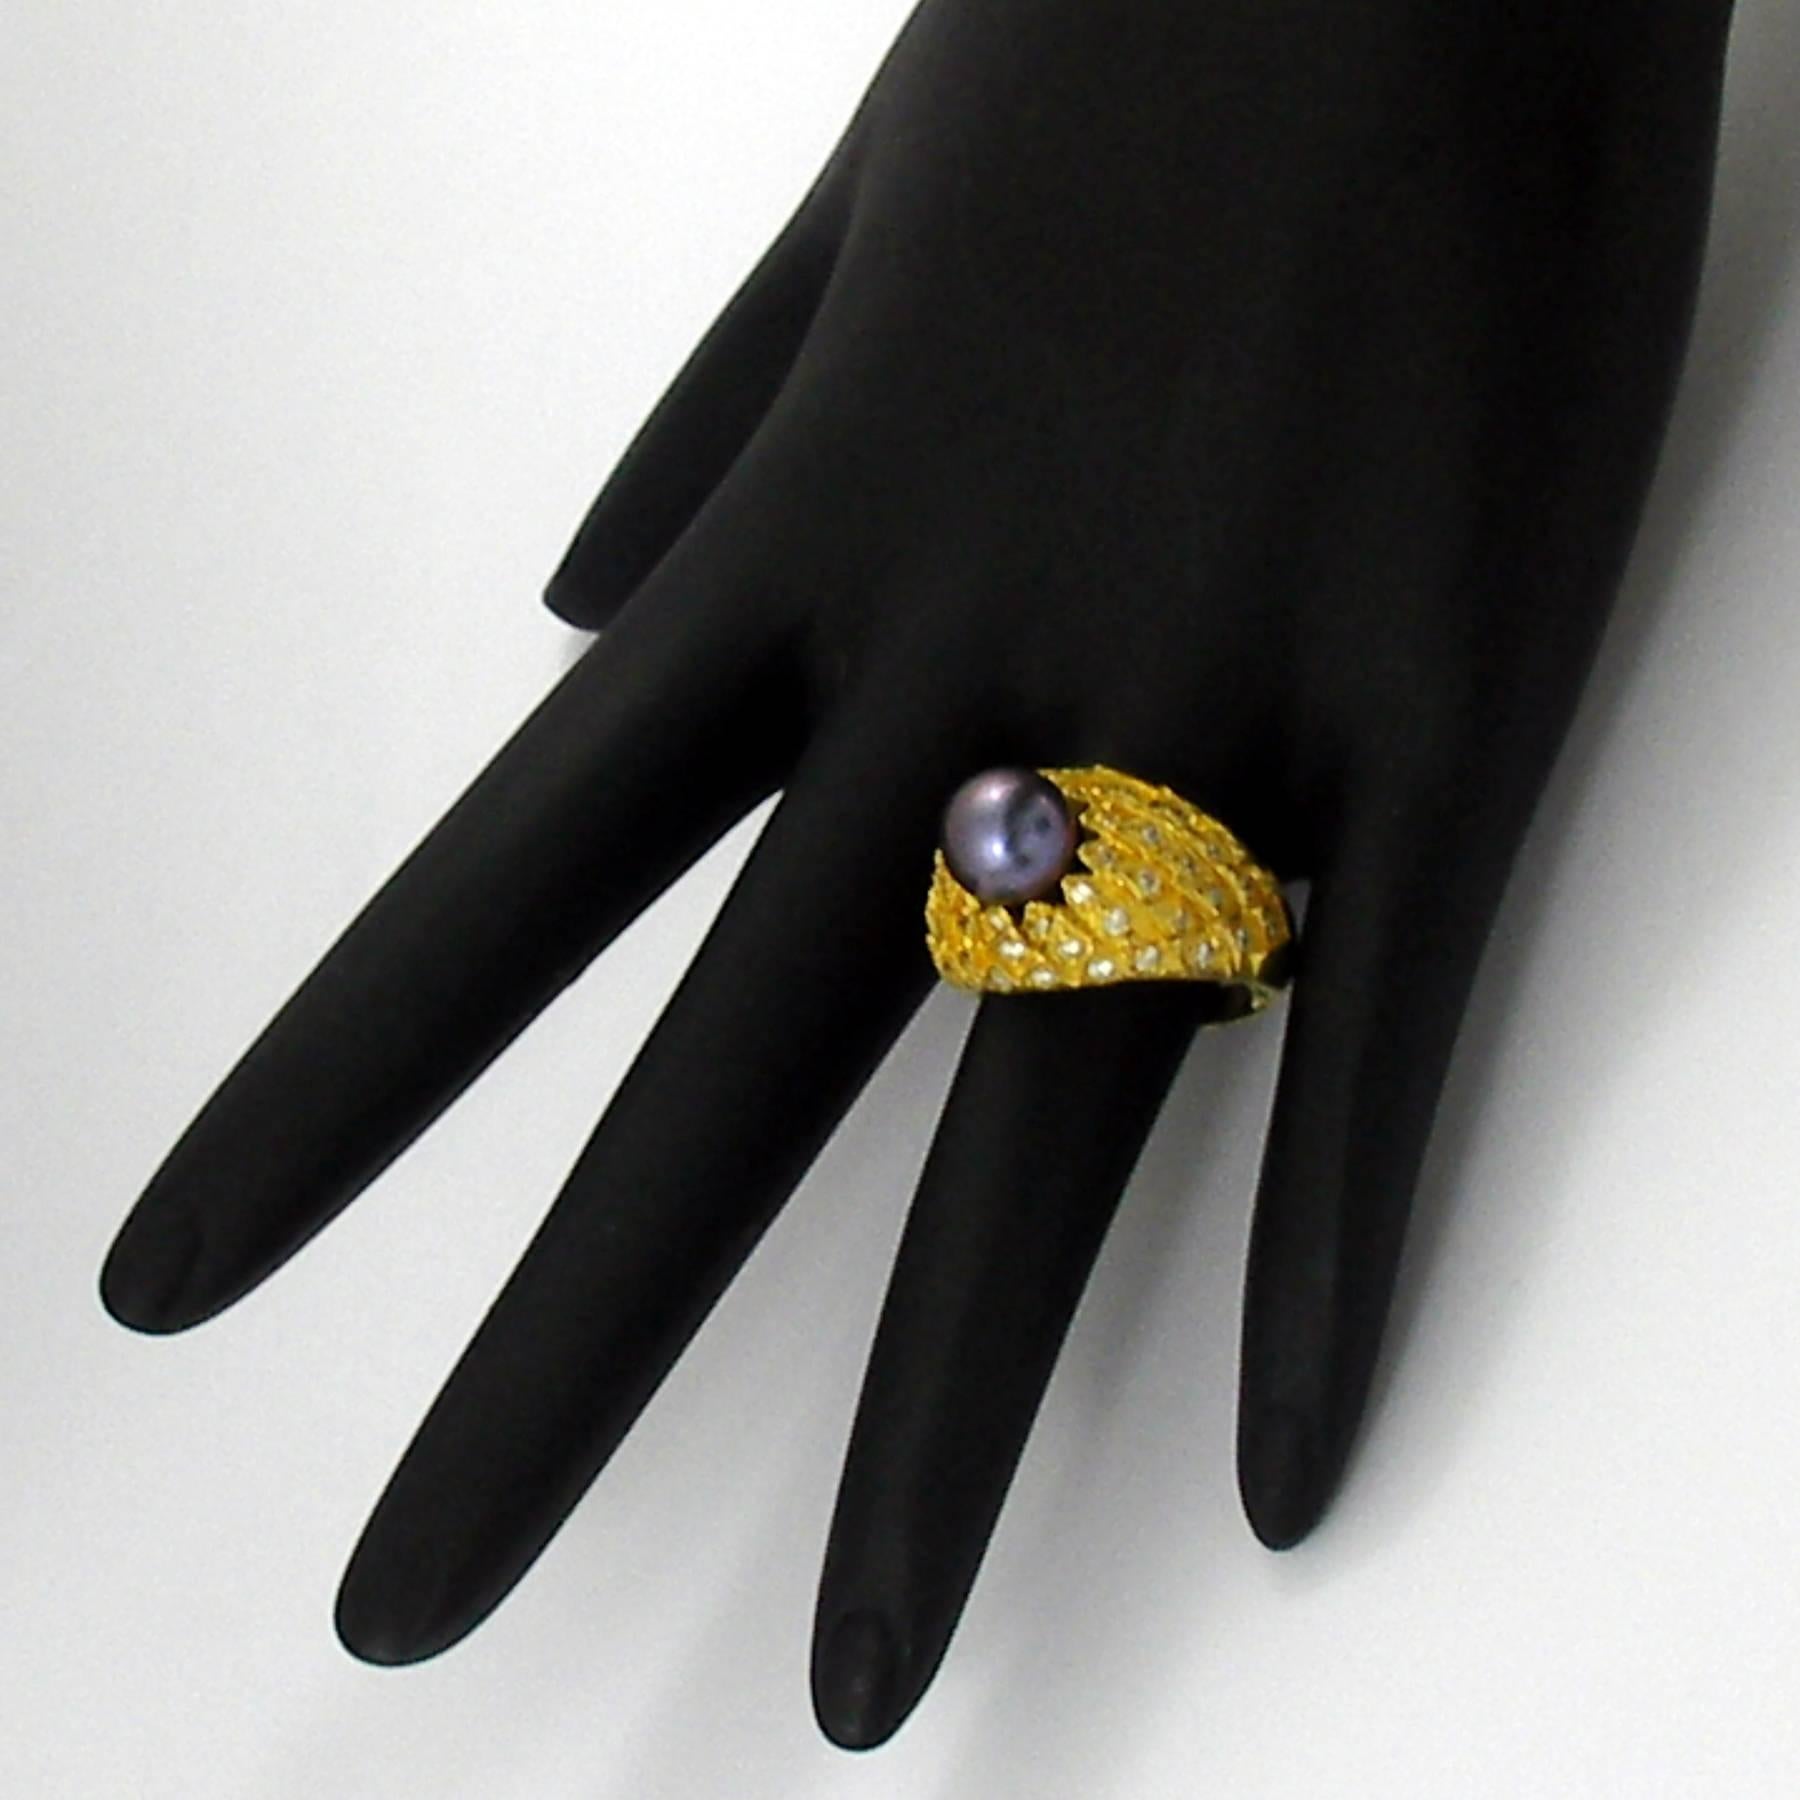 A Peacock designed high karat gold ring centered around one black cultured pearl measuring 9mm, and embellished with assorted round brilliant cut diamonds weighing 0.75ct total approximate weight of overall G color and VS1/VS2 clarity. With a